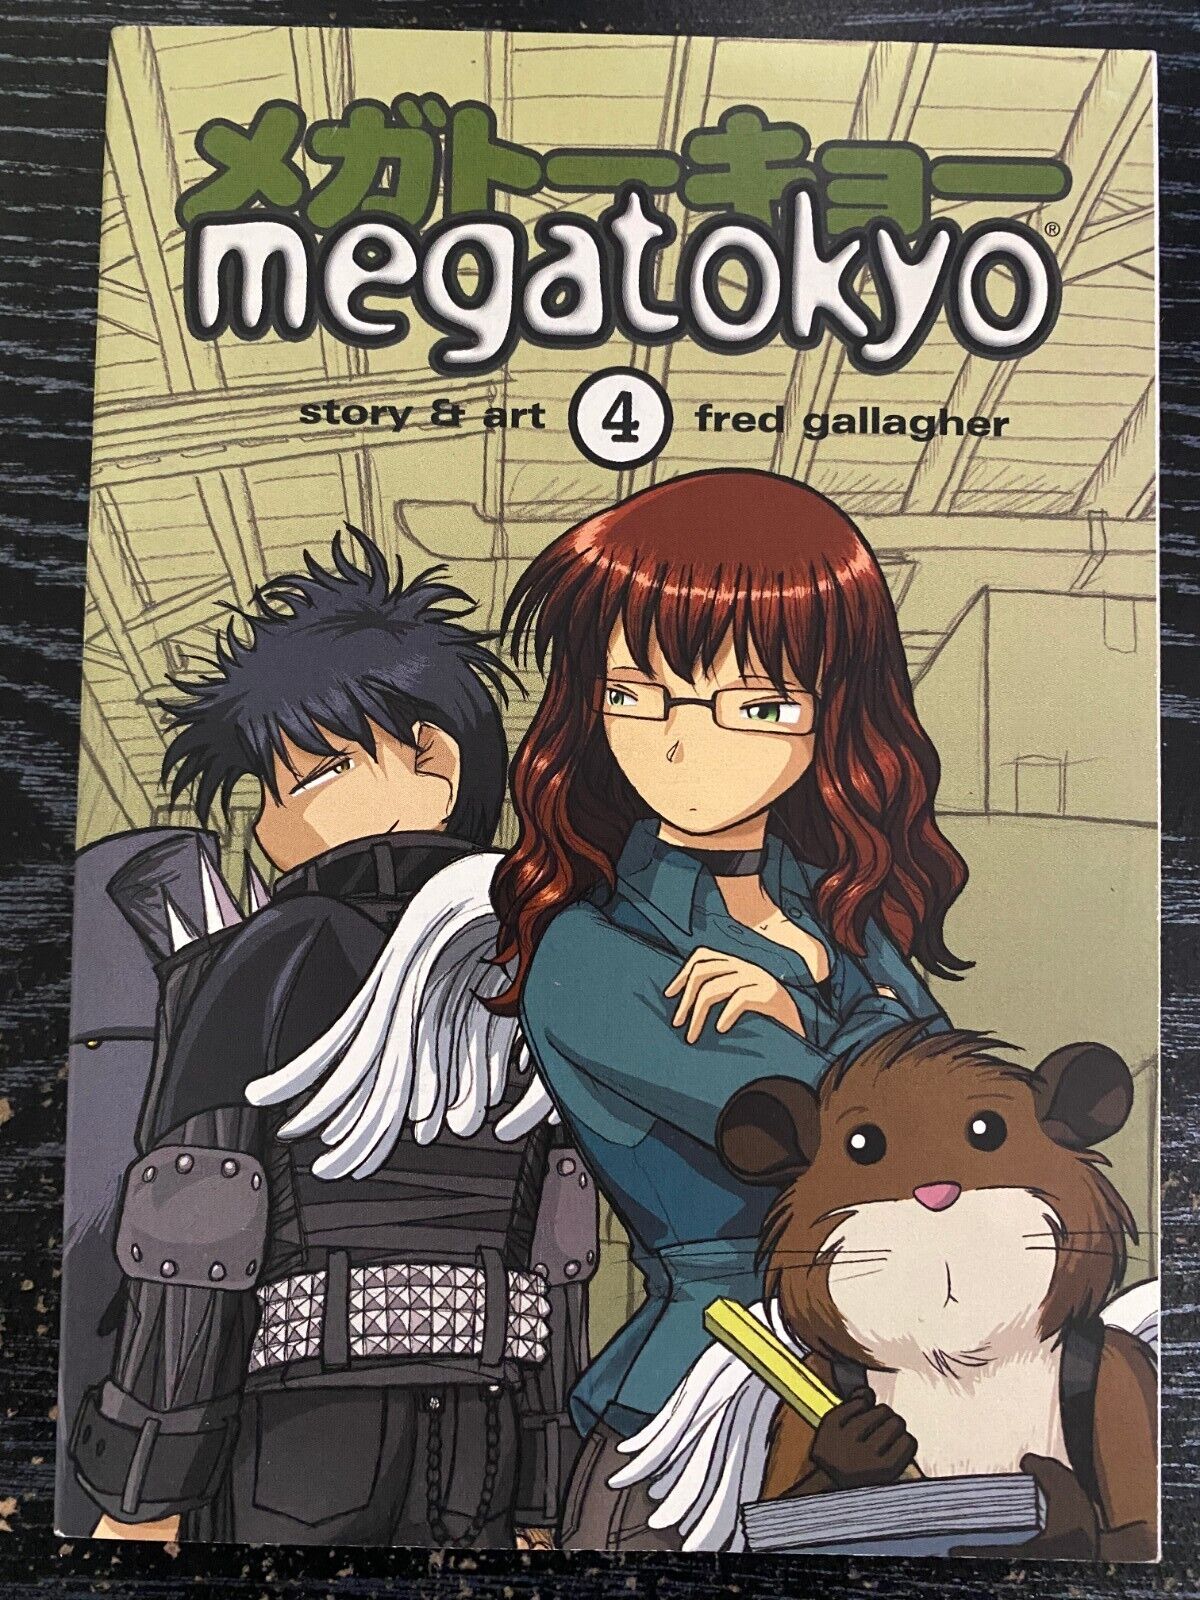 Megatokyo, Vol 4 by Fred Gallagher - VERY GOOD